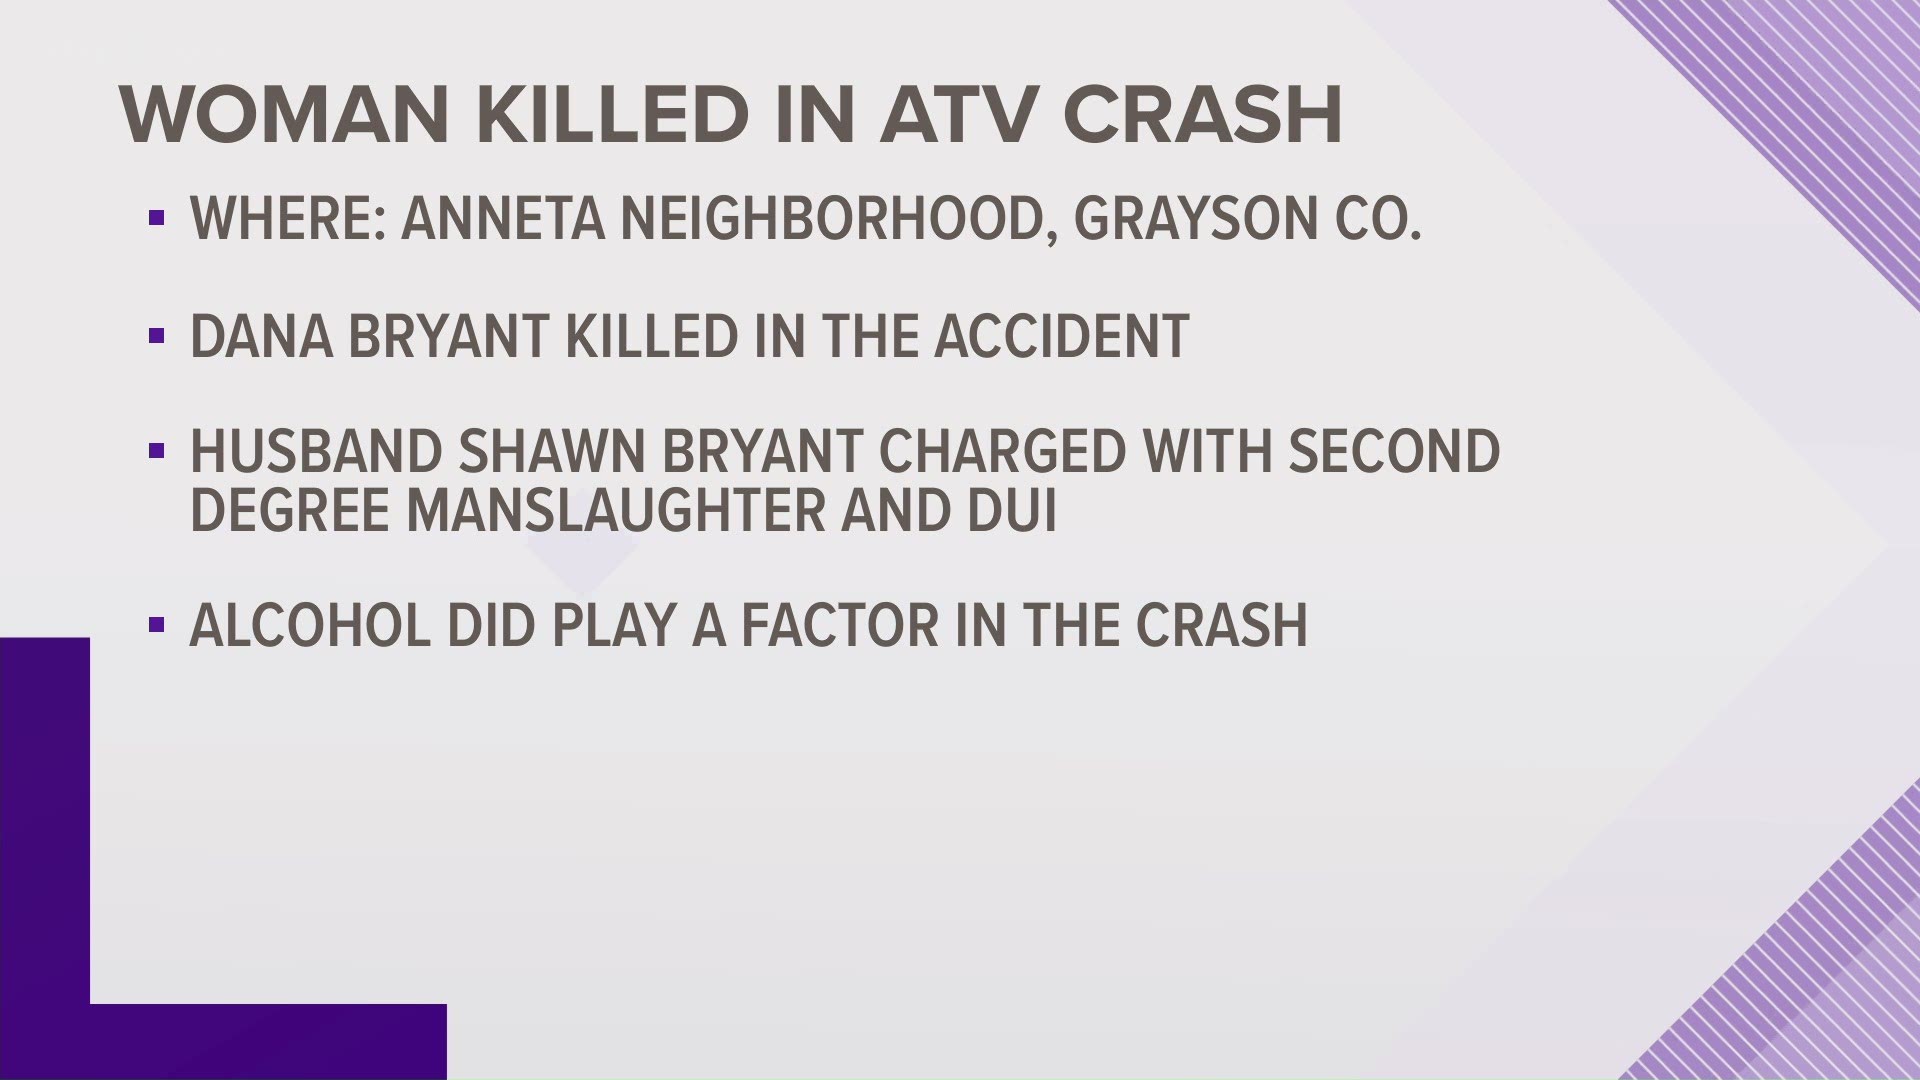 The Grayson County Sheriff’s office said the deadly accident happened early Sunday morning in an area off Scott Road.